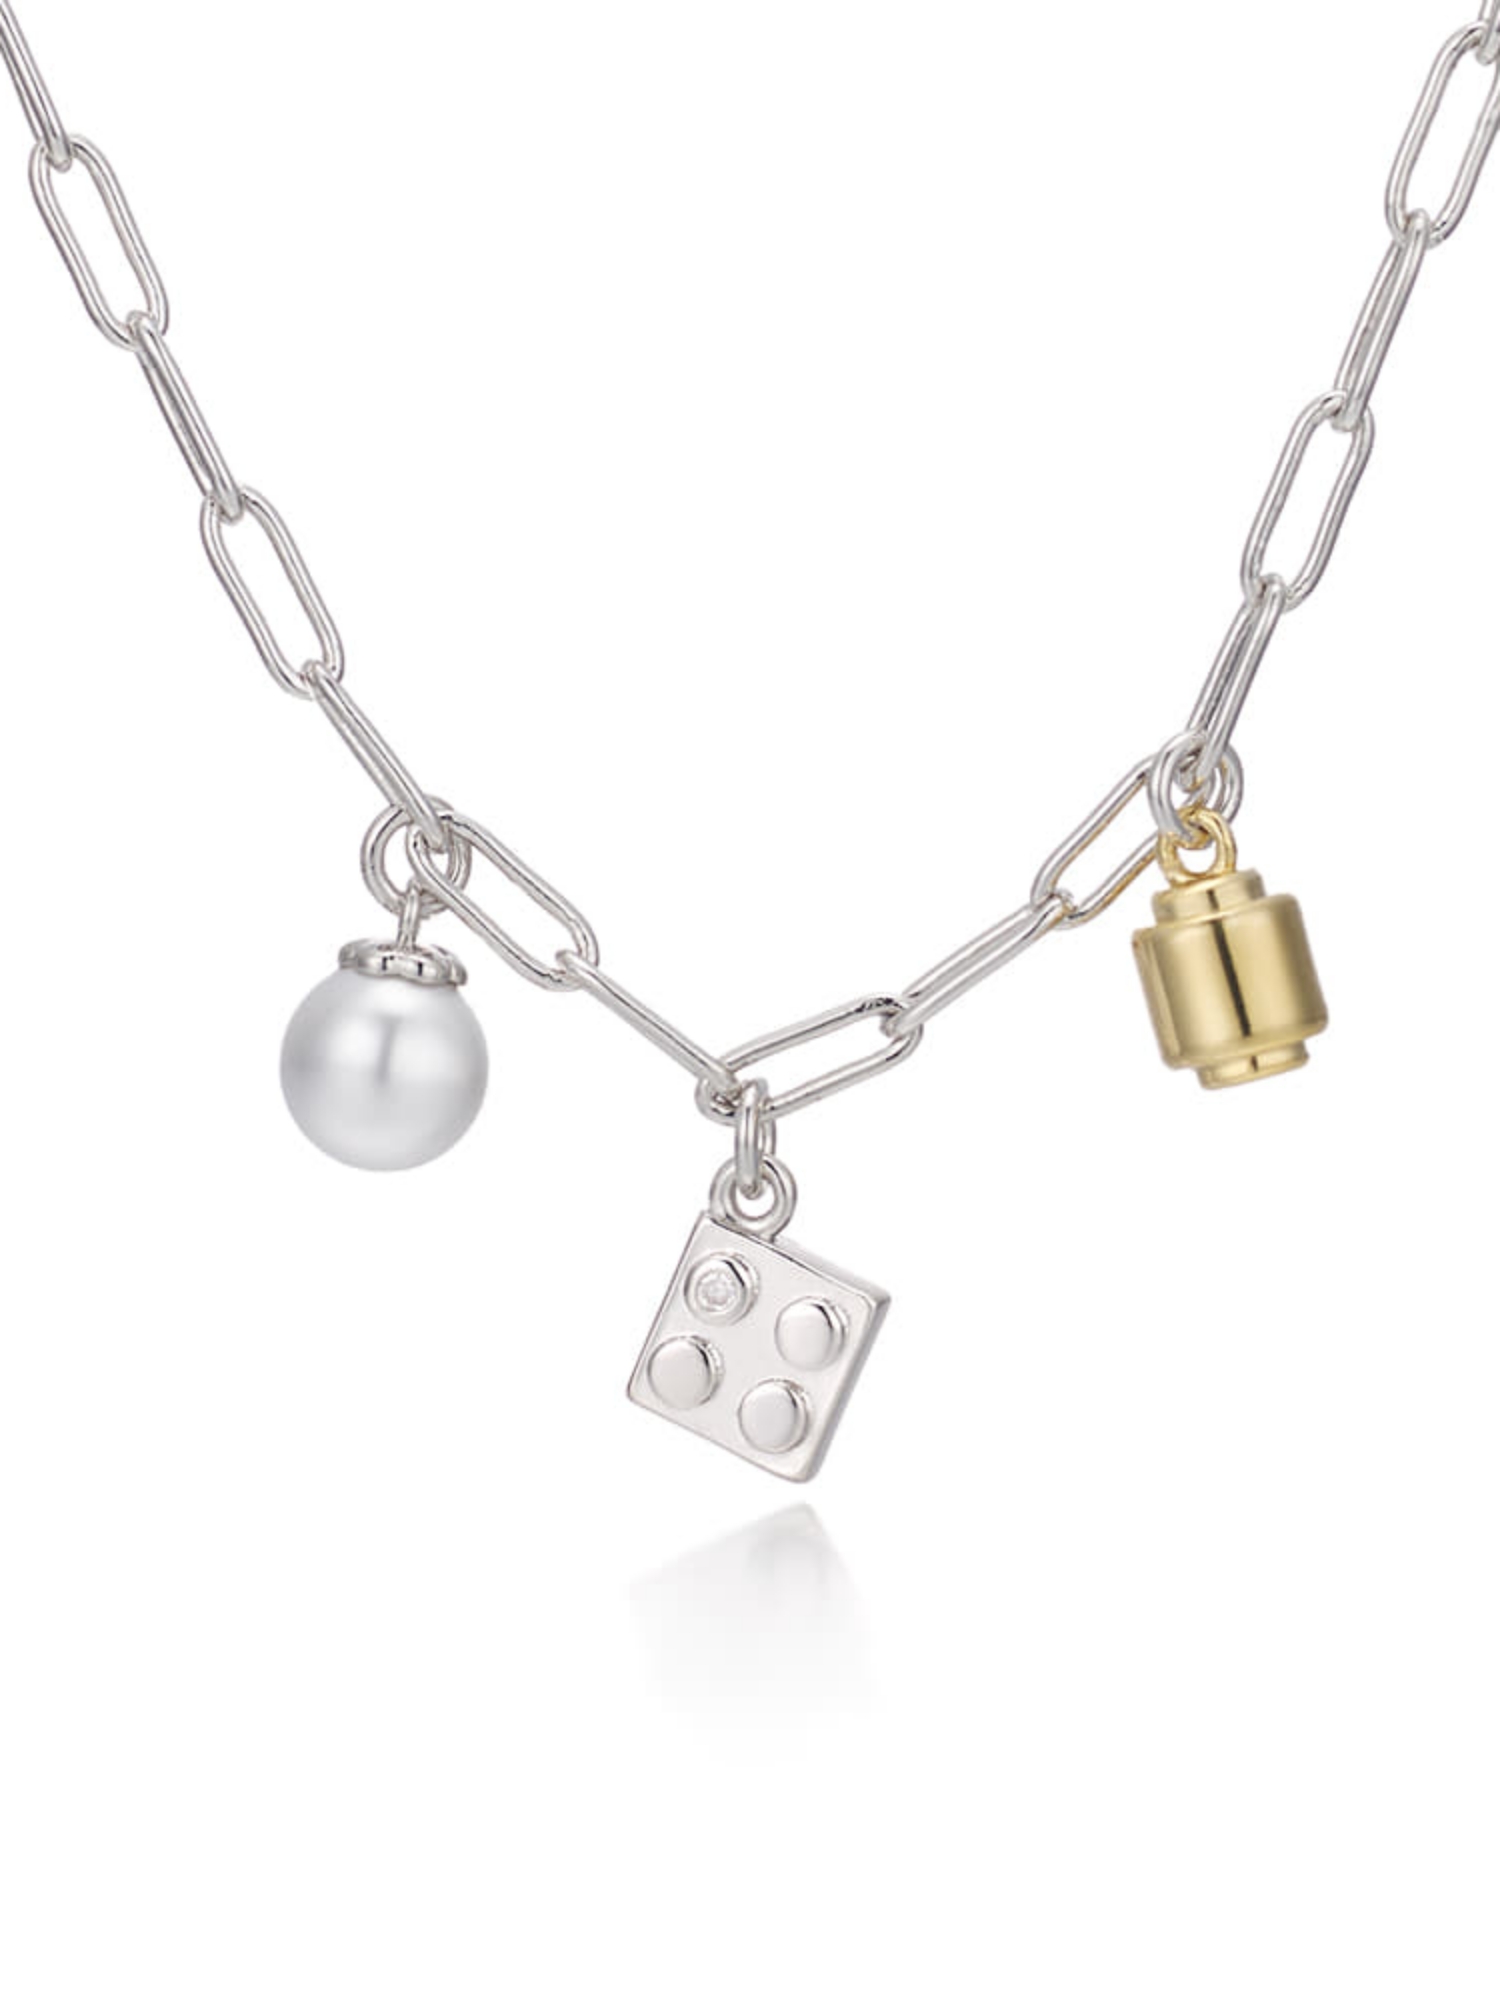 PLAY LEGO Charm Necklace Silver